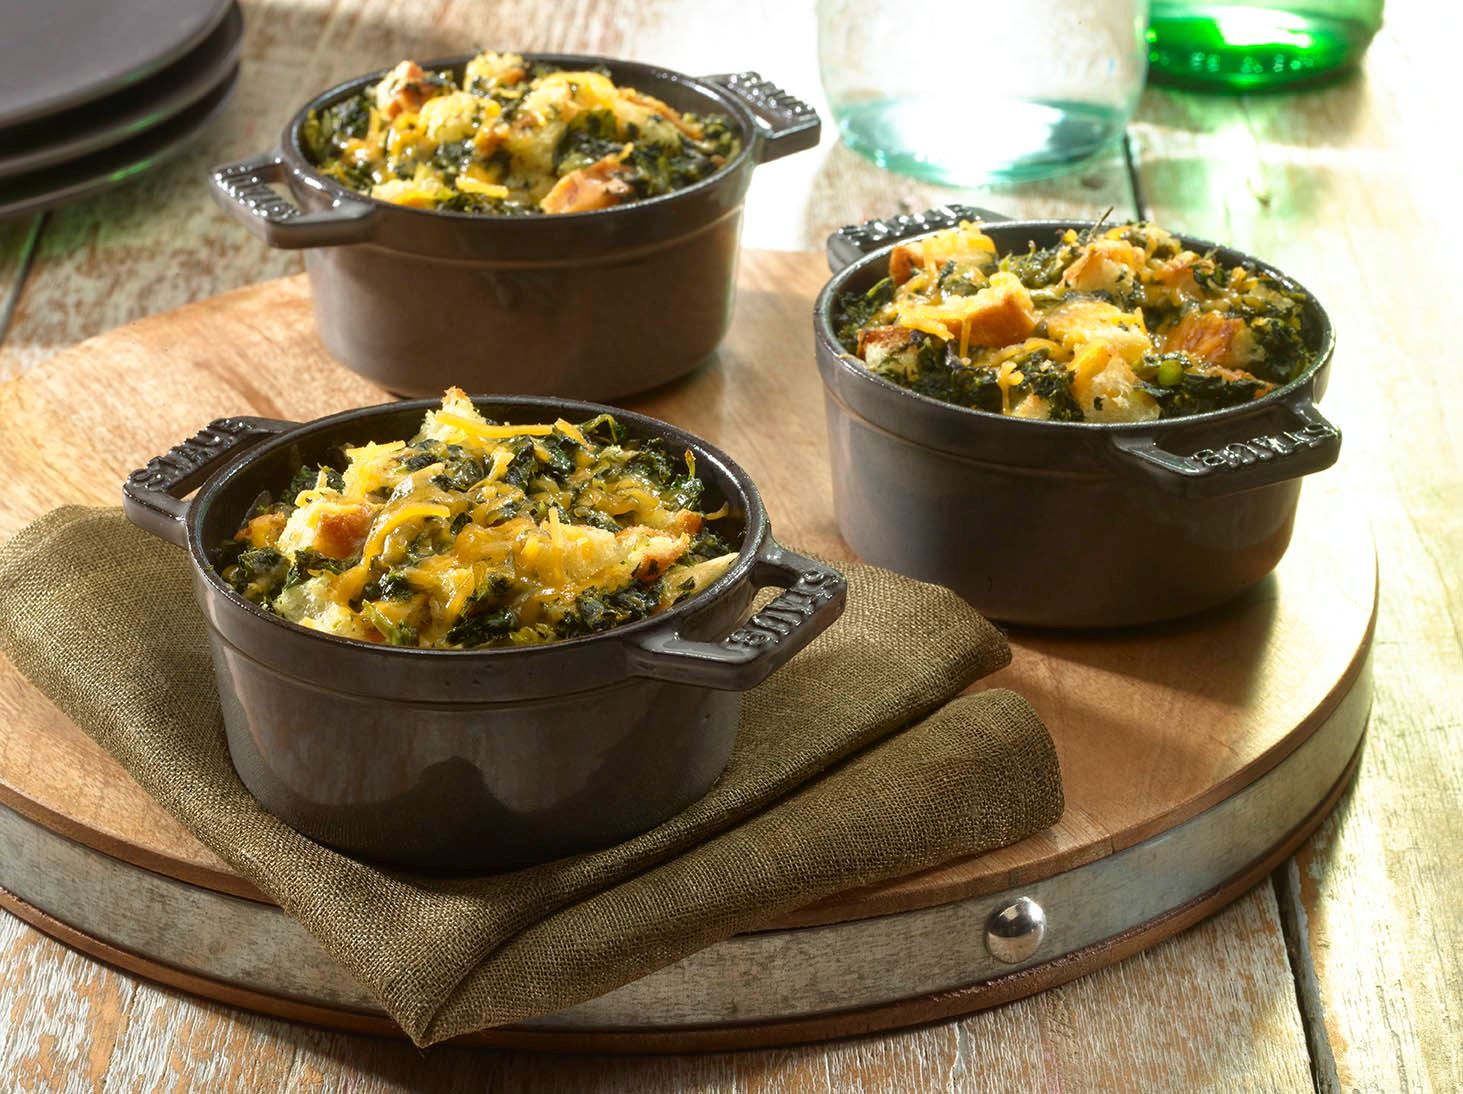 Cheddar Bread Pudding with Greens